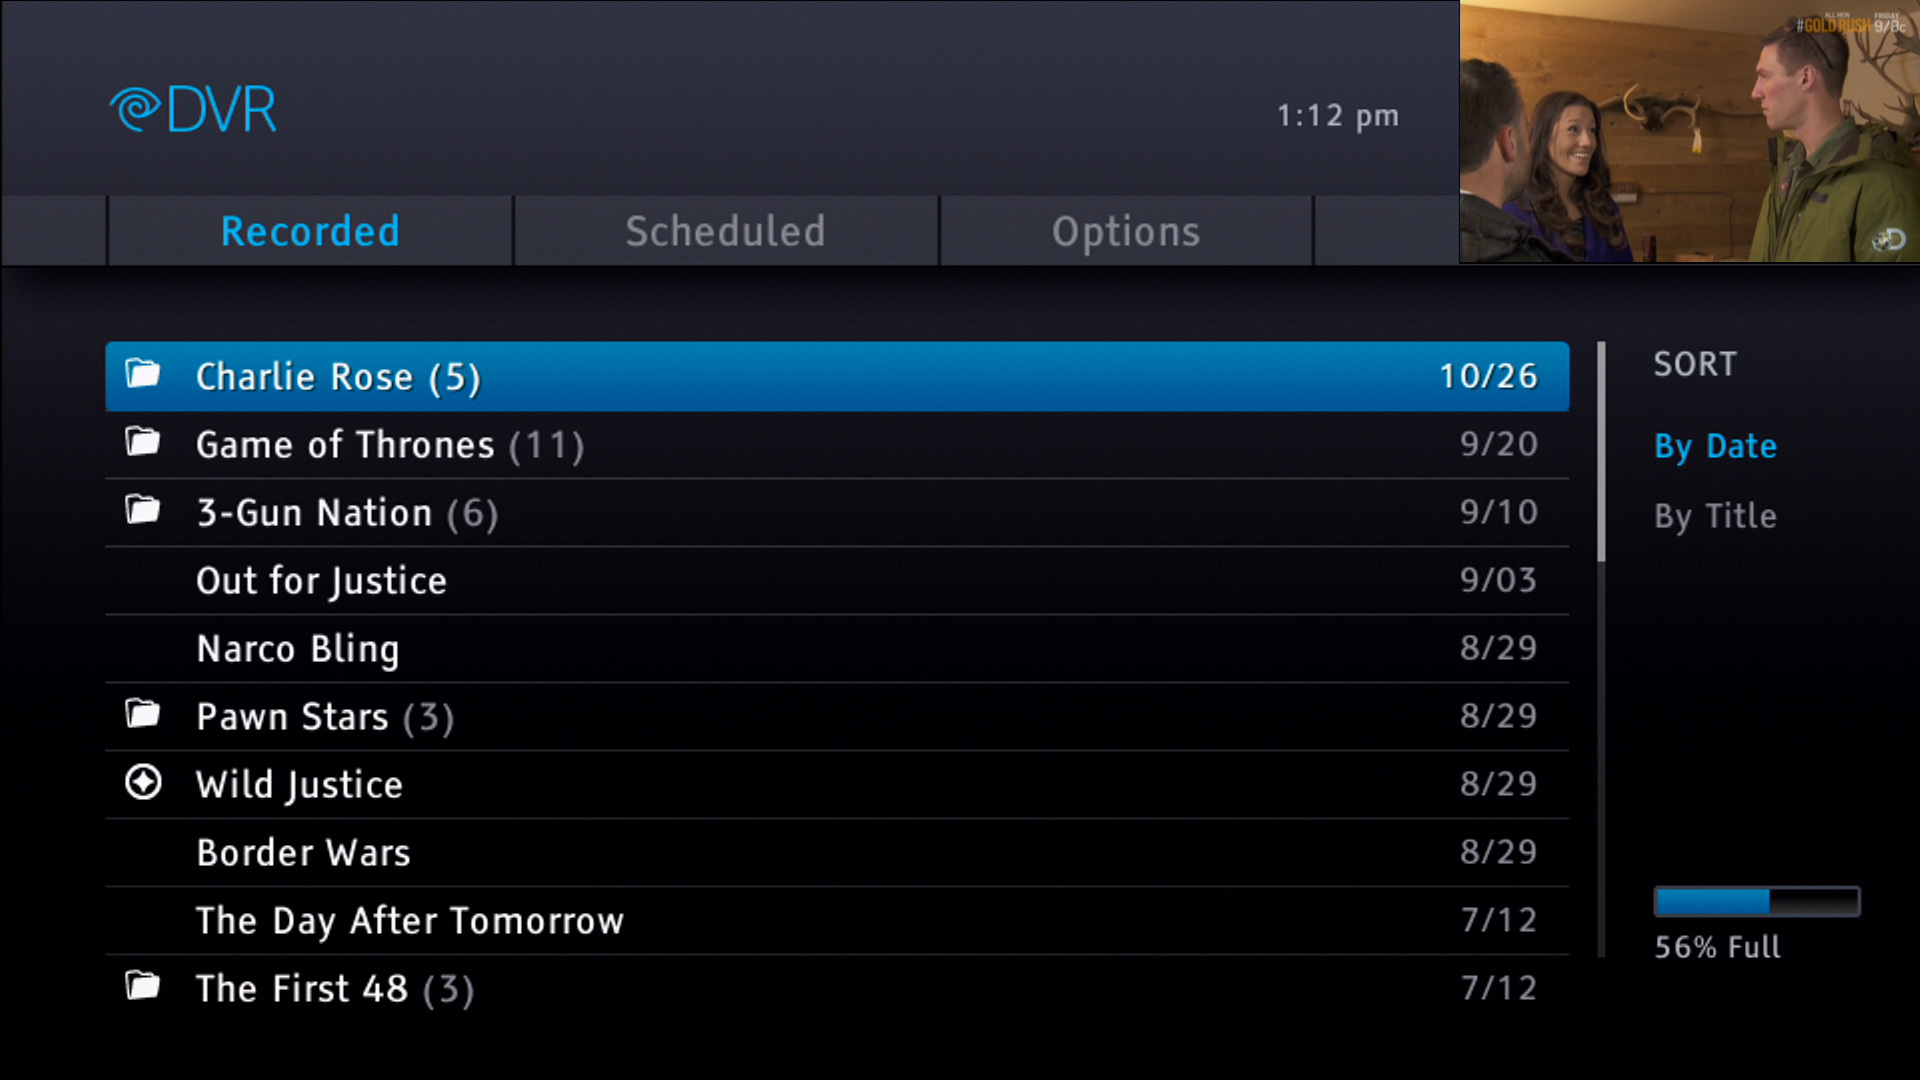 time warner cable cloud-based tv guide services improve customer